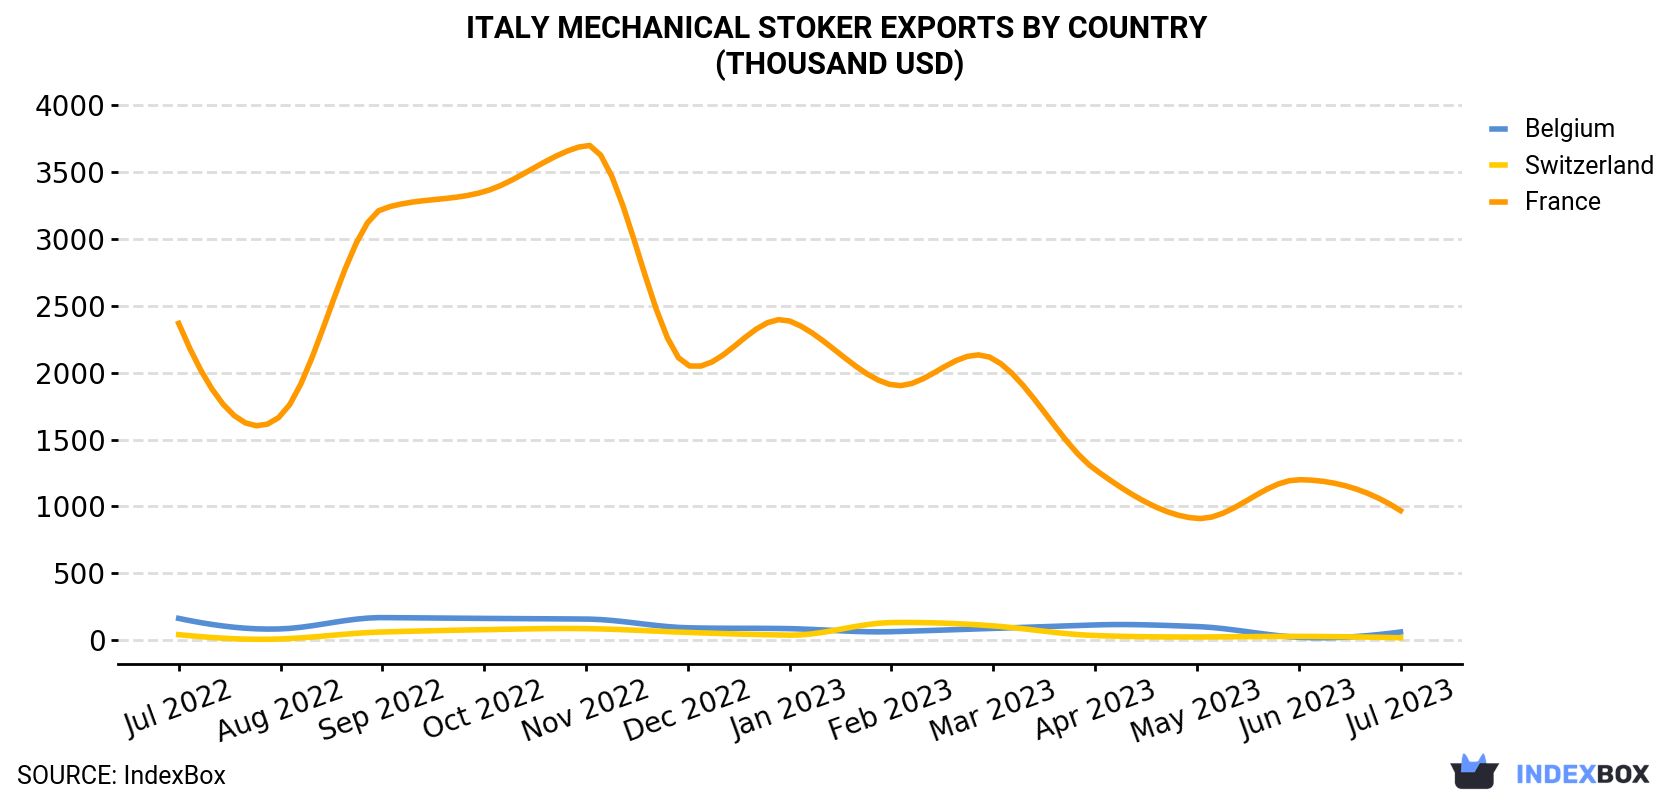 Italy Mechanical Stoker Exports By Country (Thousand USD)